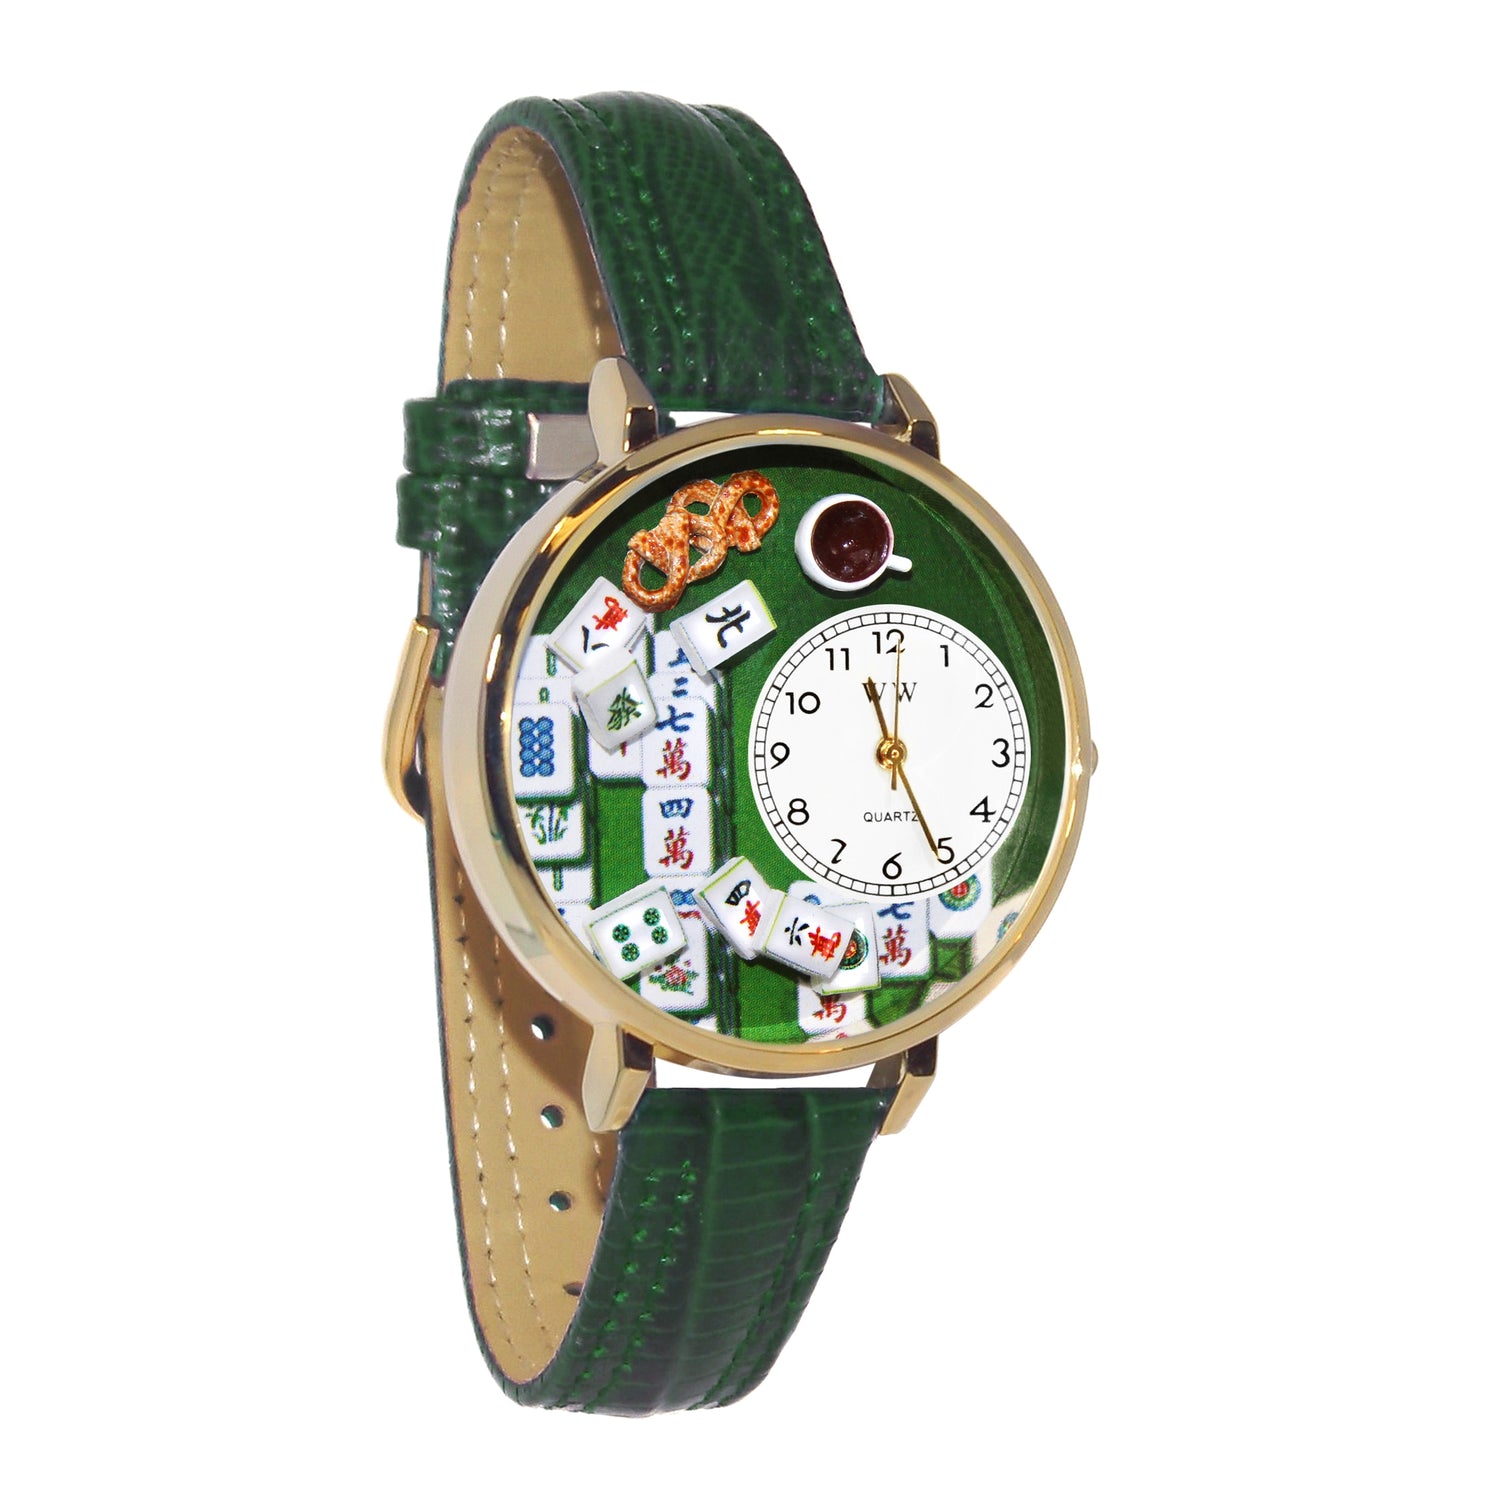 Whimsical Gifts | Mah Jongg 3D Watch Large Style | Handmade in USA | Hobbies & Special Interests | Casino | Gaming | Game Night | Novelty Unique Fun Miniatures Gift | Gold Finish Green Leather Watch Band